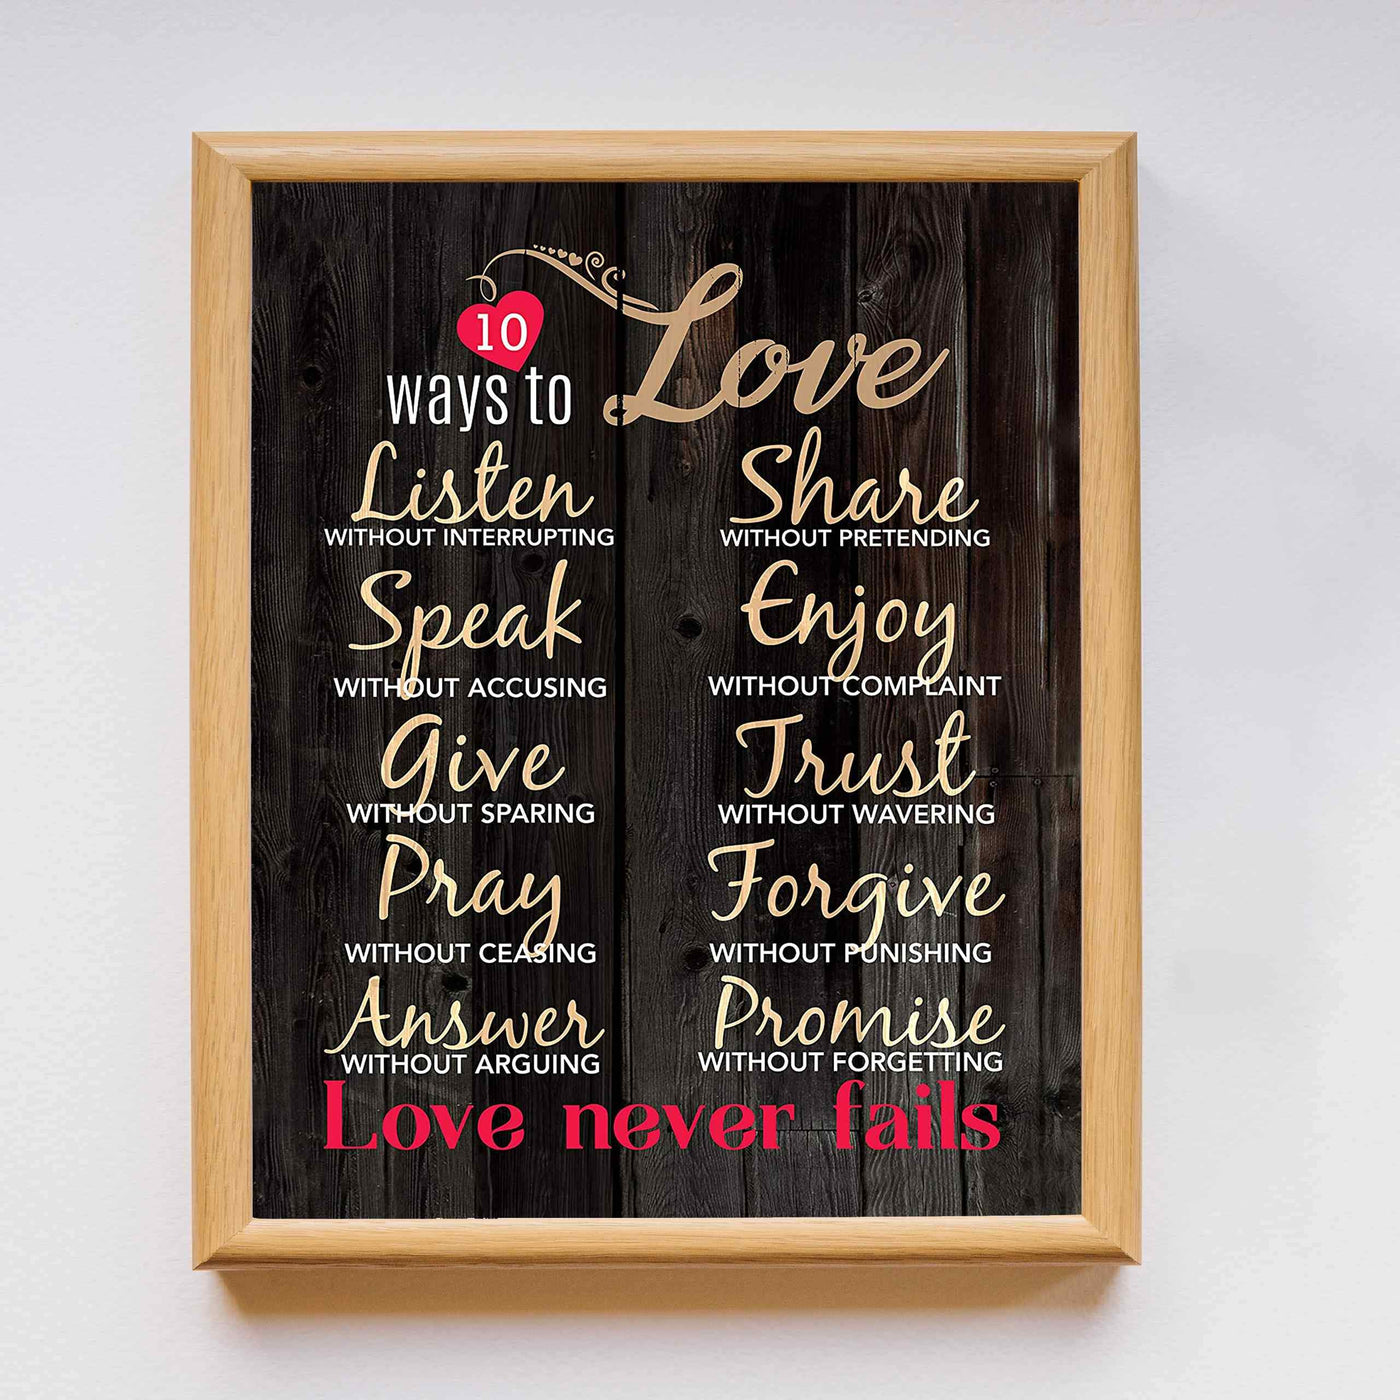 10 Ways To Love Inspirational Wall Art Decor -11 x 14" Love & Marriage Print w/Replica Wood Design-Ready to Frame. Romantic Gift & Perfect Wedding Sign. Love Never Fails! Printed on Paper-Not Wood.